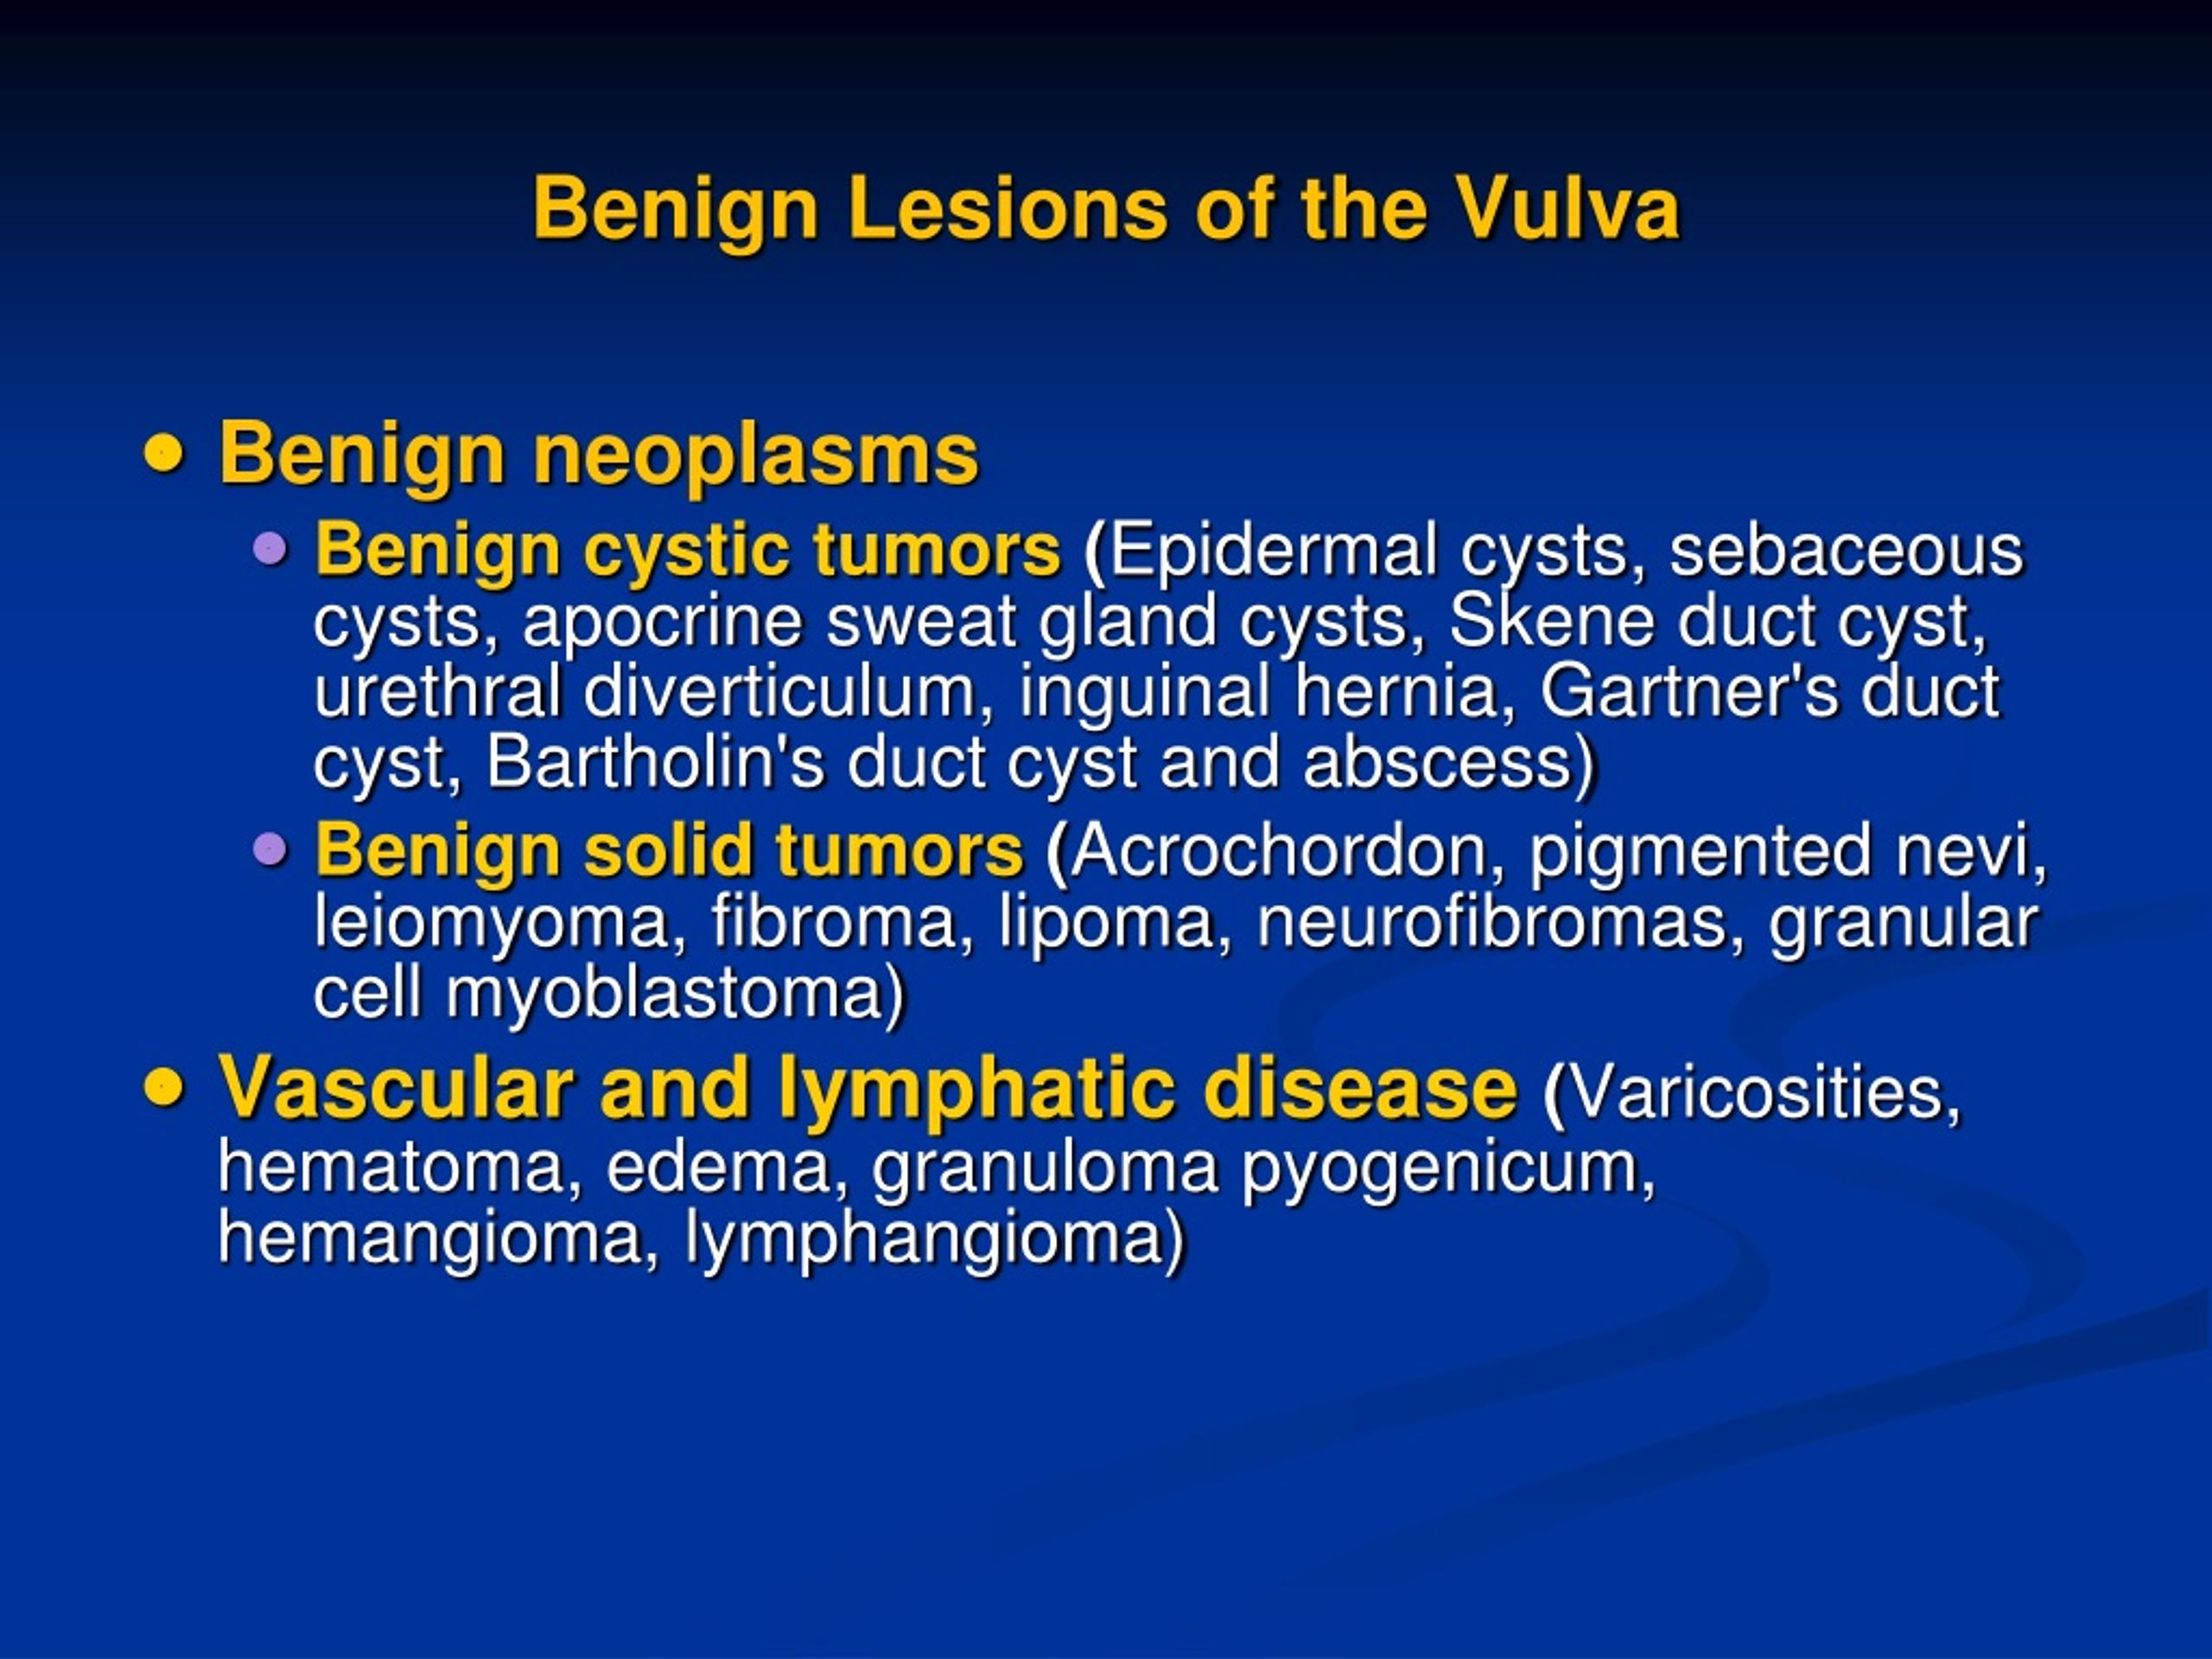 Ppt Benign Disorders Of The Vulva Powerpoint Presentation Free Download Id9242206 5526